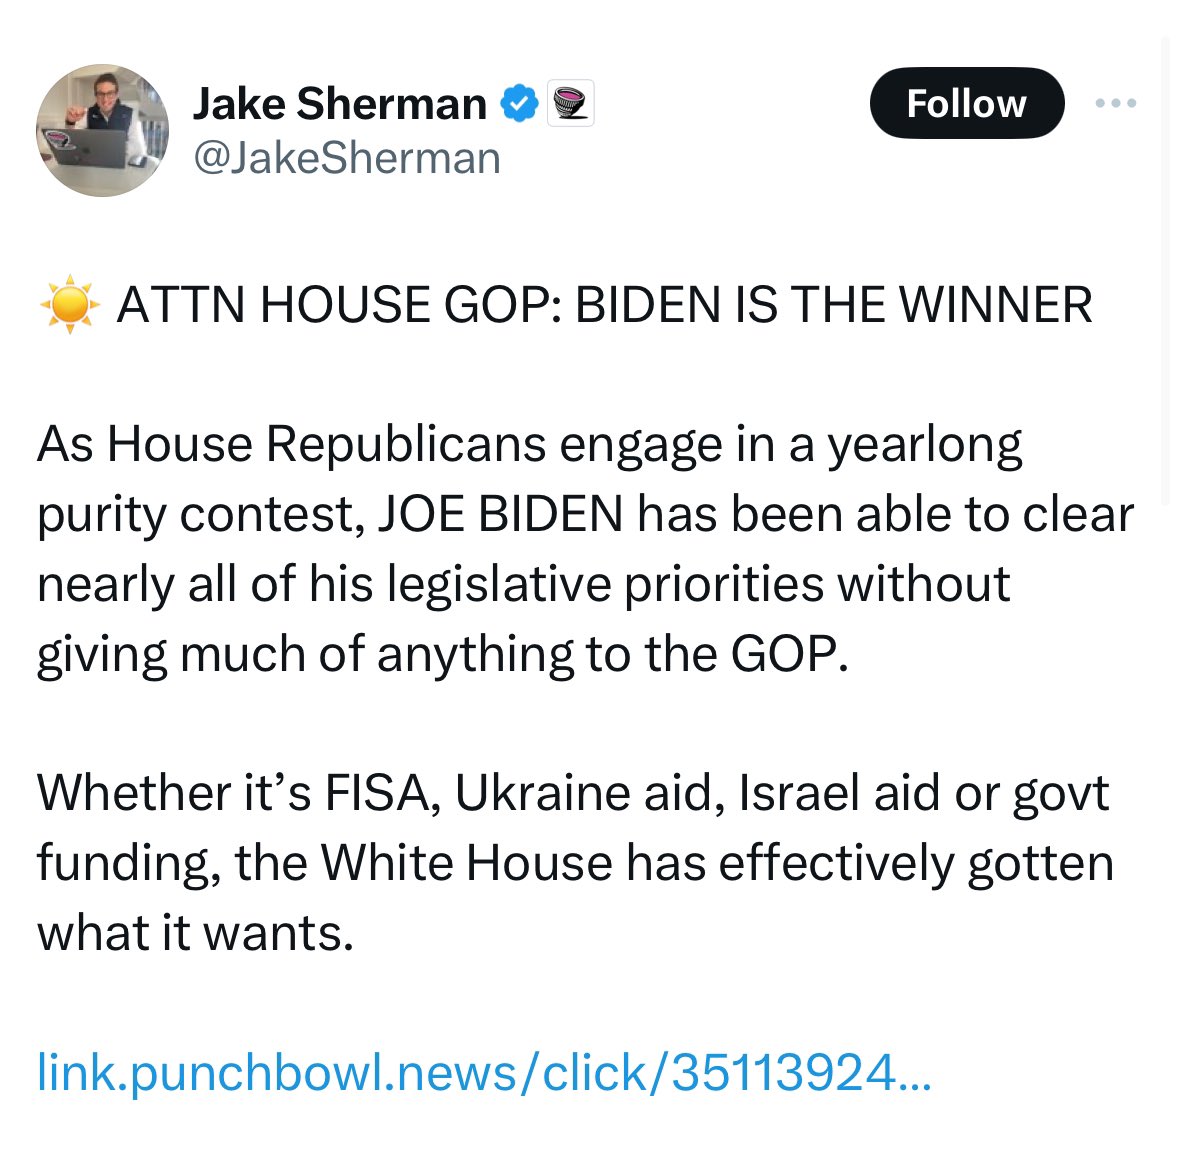 Despite Republicans controlling the House of Representatives, Biden continues to gut our country and steamroll ahead with his globalist agenda. Patriots, are you tired of losing?